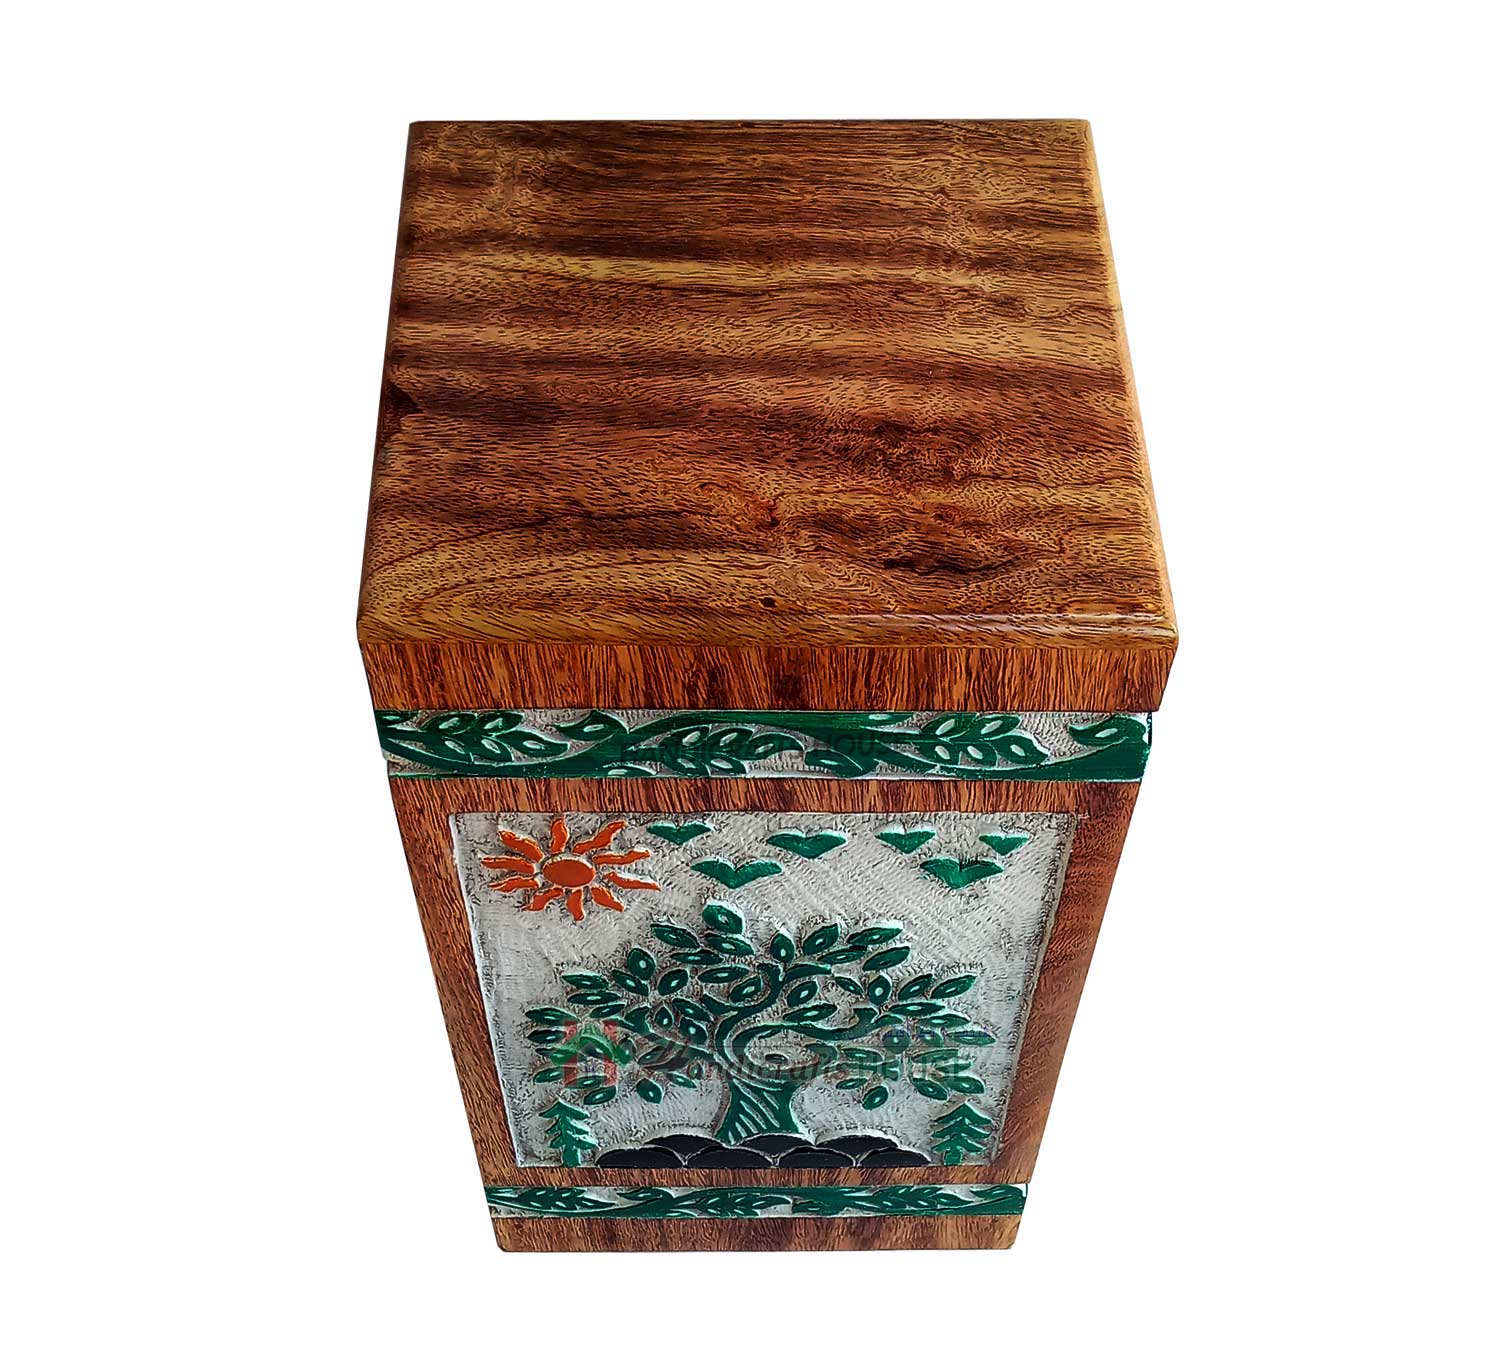 Funeral Urns For Ashes, Decorative Tableware Timber Box, Wood Cremation Urn - Memorials Boxes